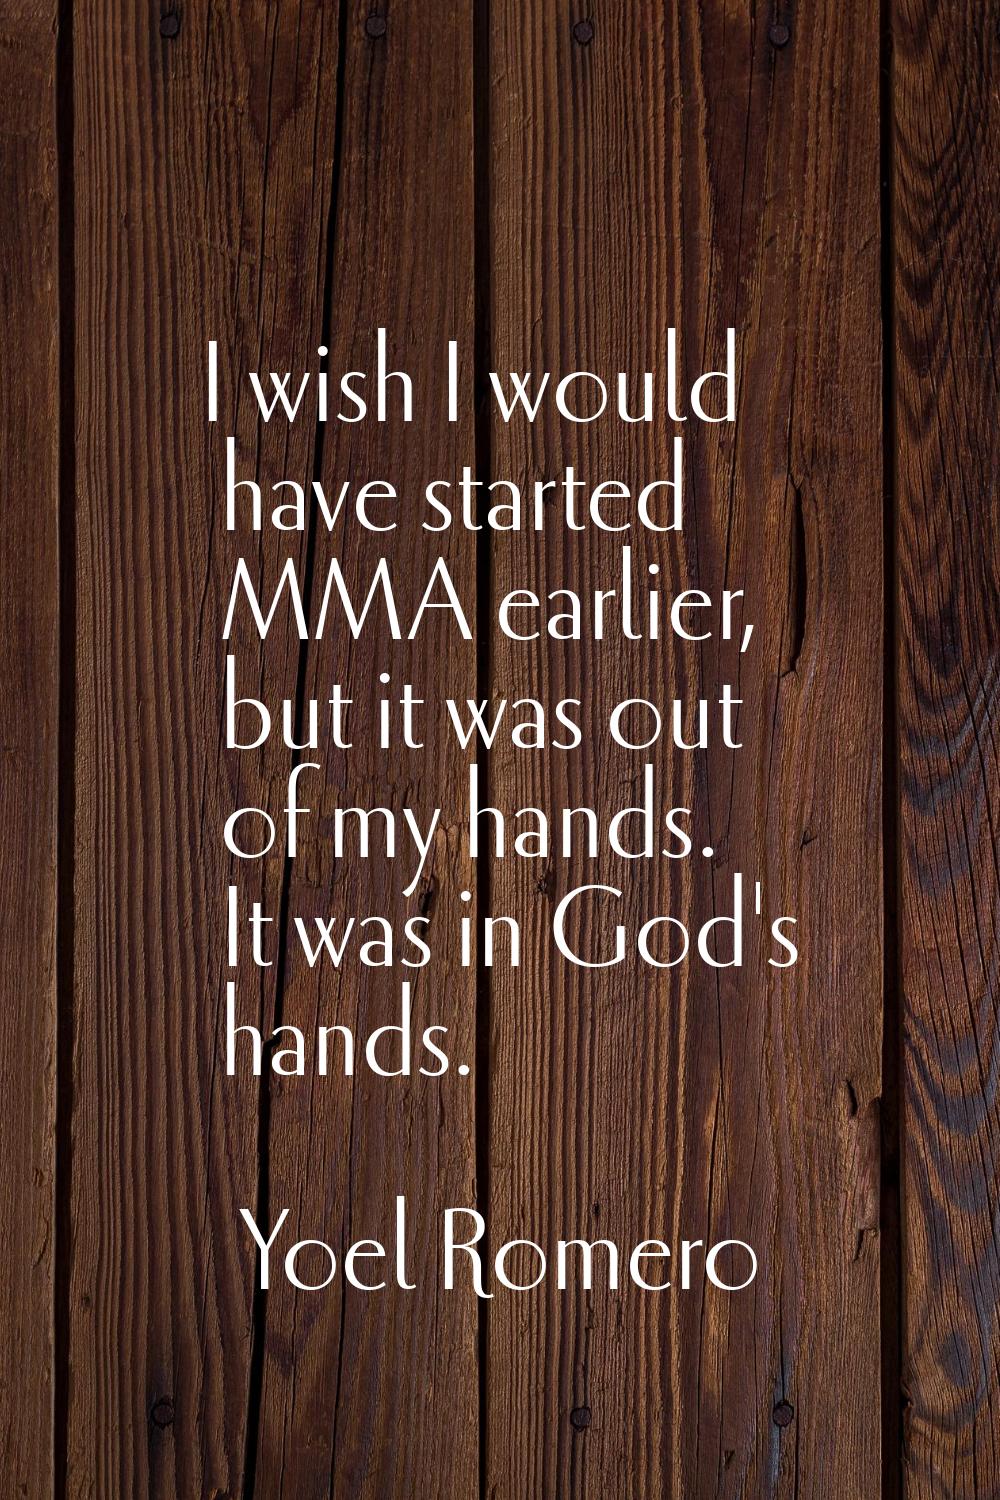 I wish I would have started MMA earlier, but it was out of my hands. It was in God's hands.